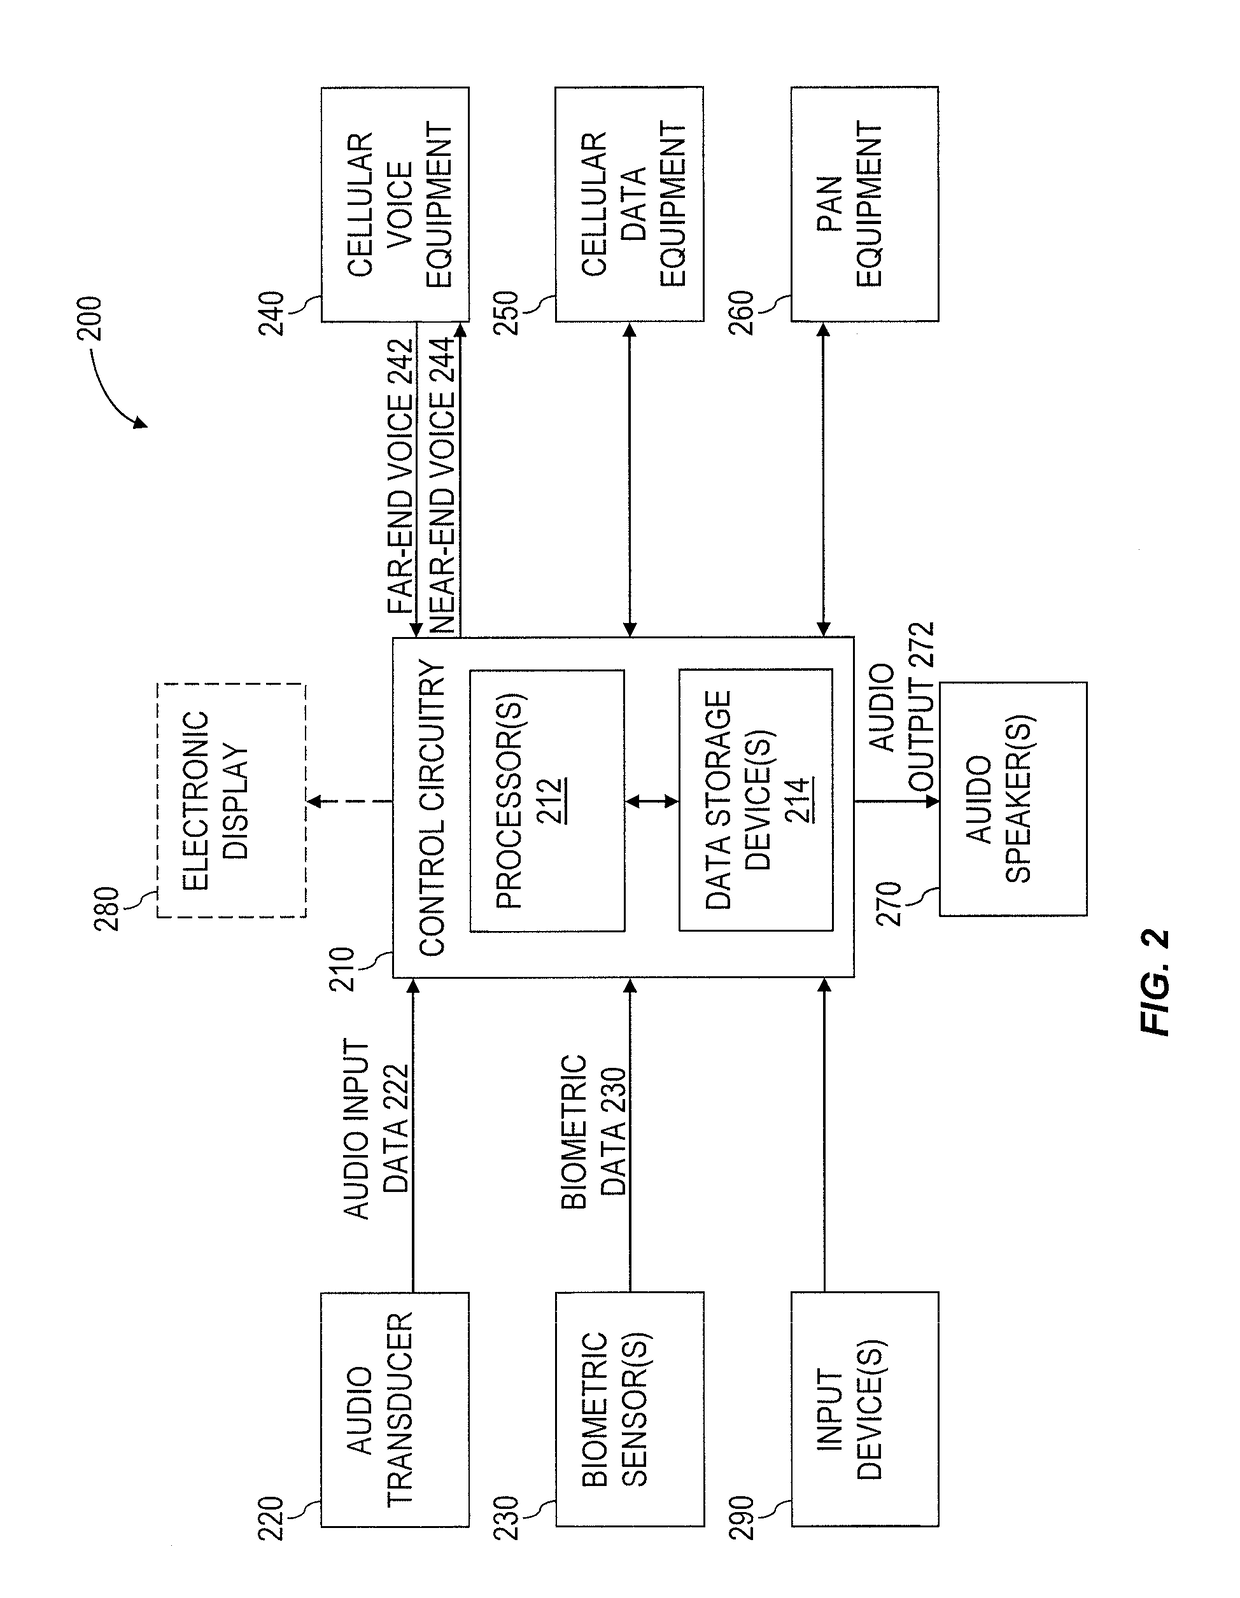 Electrical systems and related methods for providing smart mobile electronic device features to a user of a wearable device